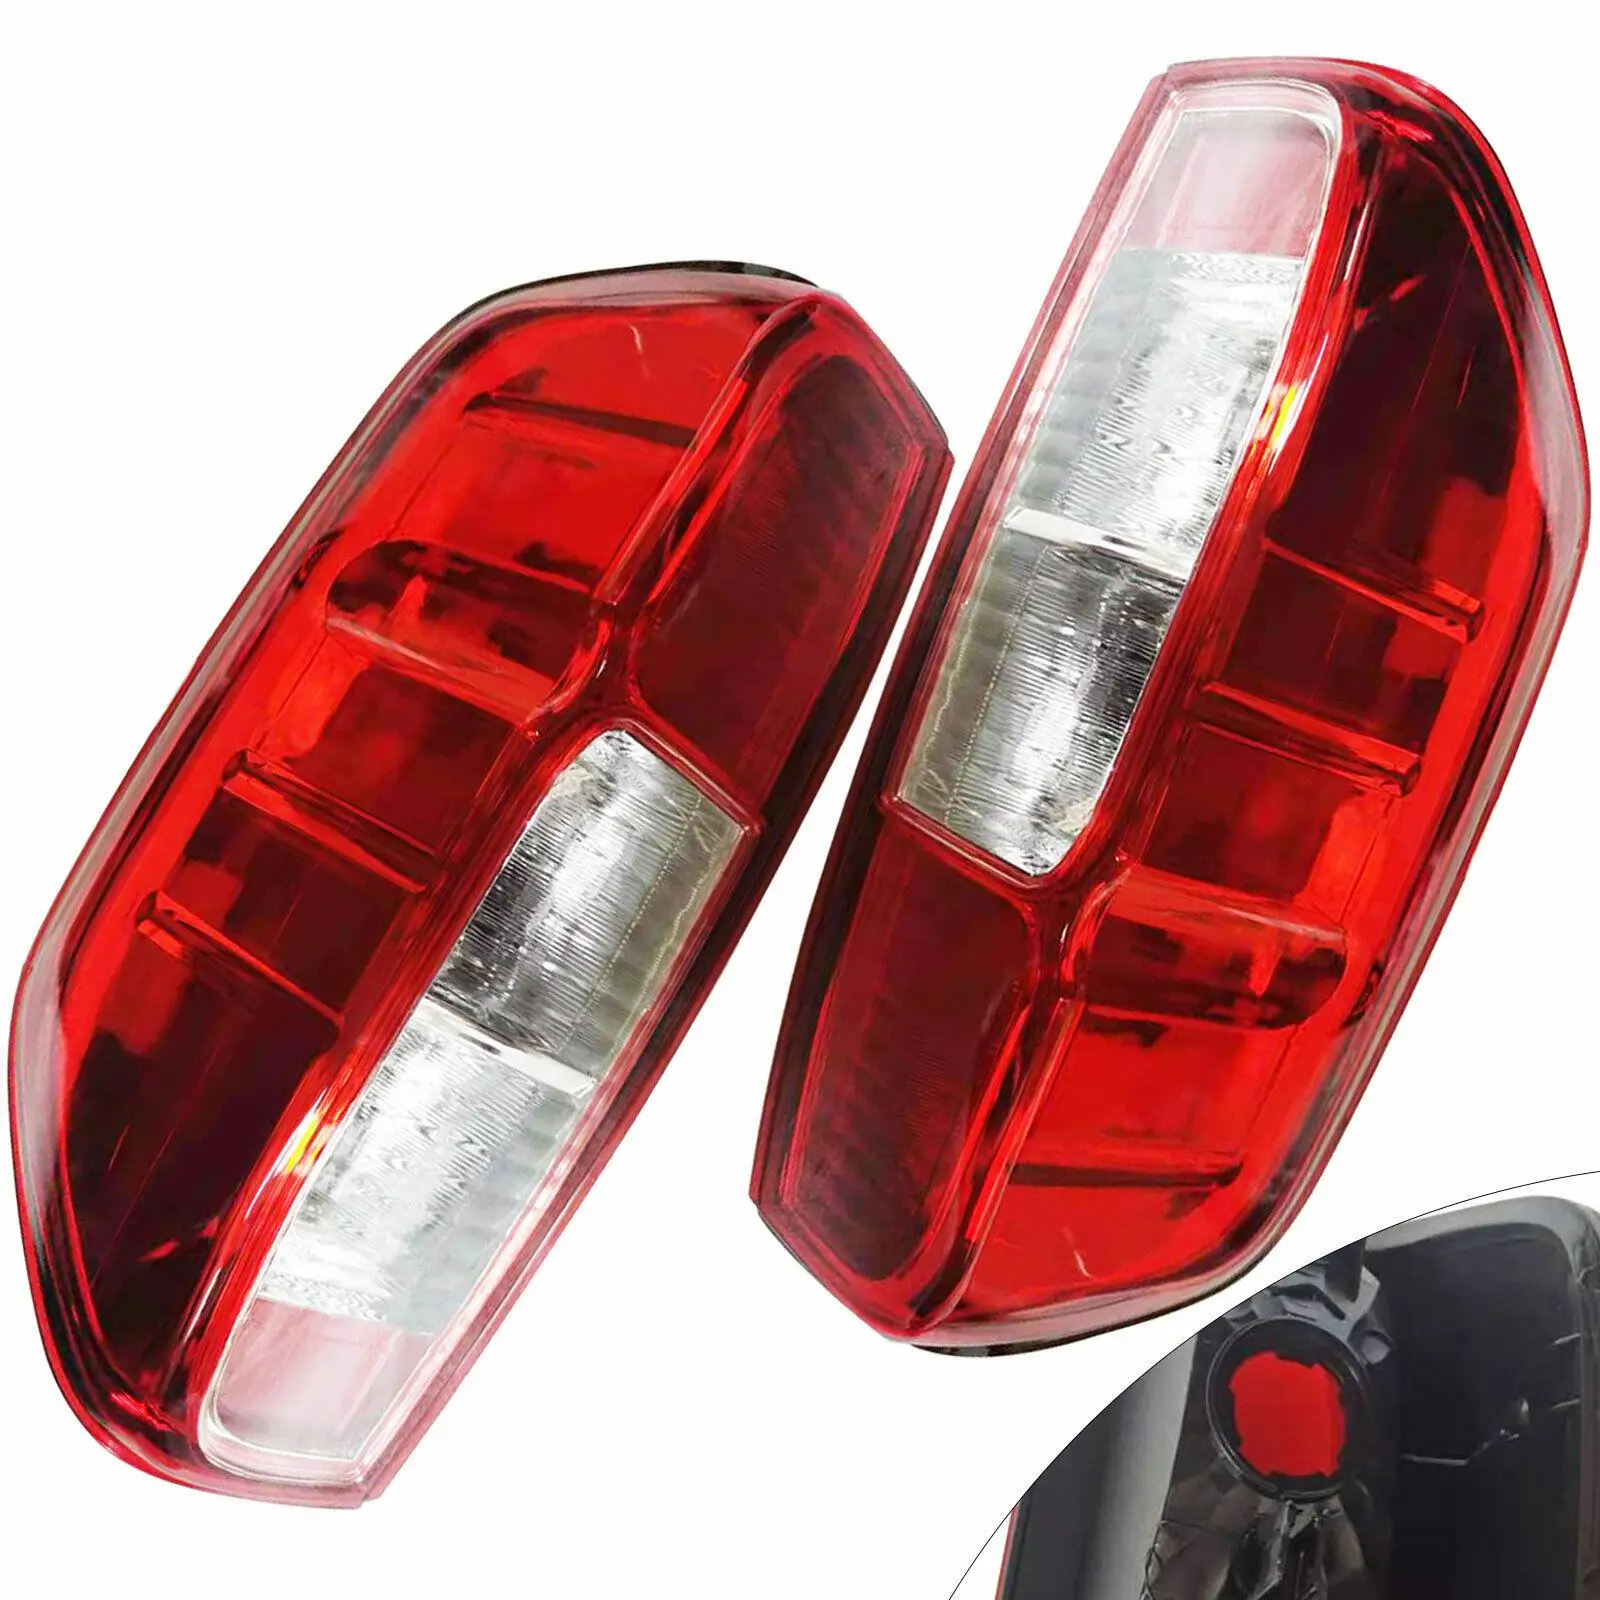 Pair Left & Right Rear Brake Lamps Tail Lights Taillamps for Nissan Frontier 2005-2015 Red Lens tail light rear brake lamp for honda crv cr v 2015 2016 2 4l right passenger side rh 33500t1wa01 ho2801186